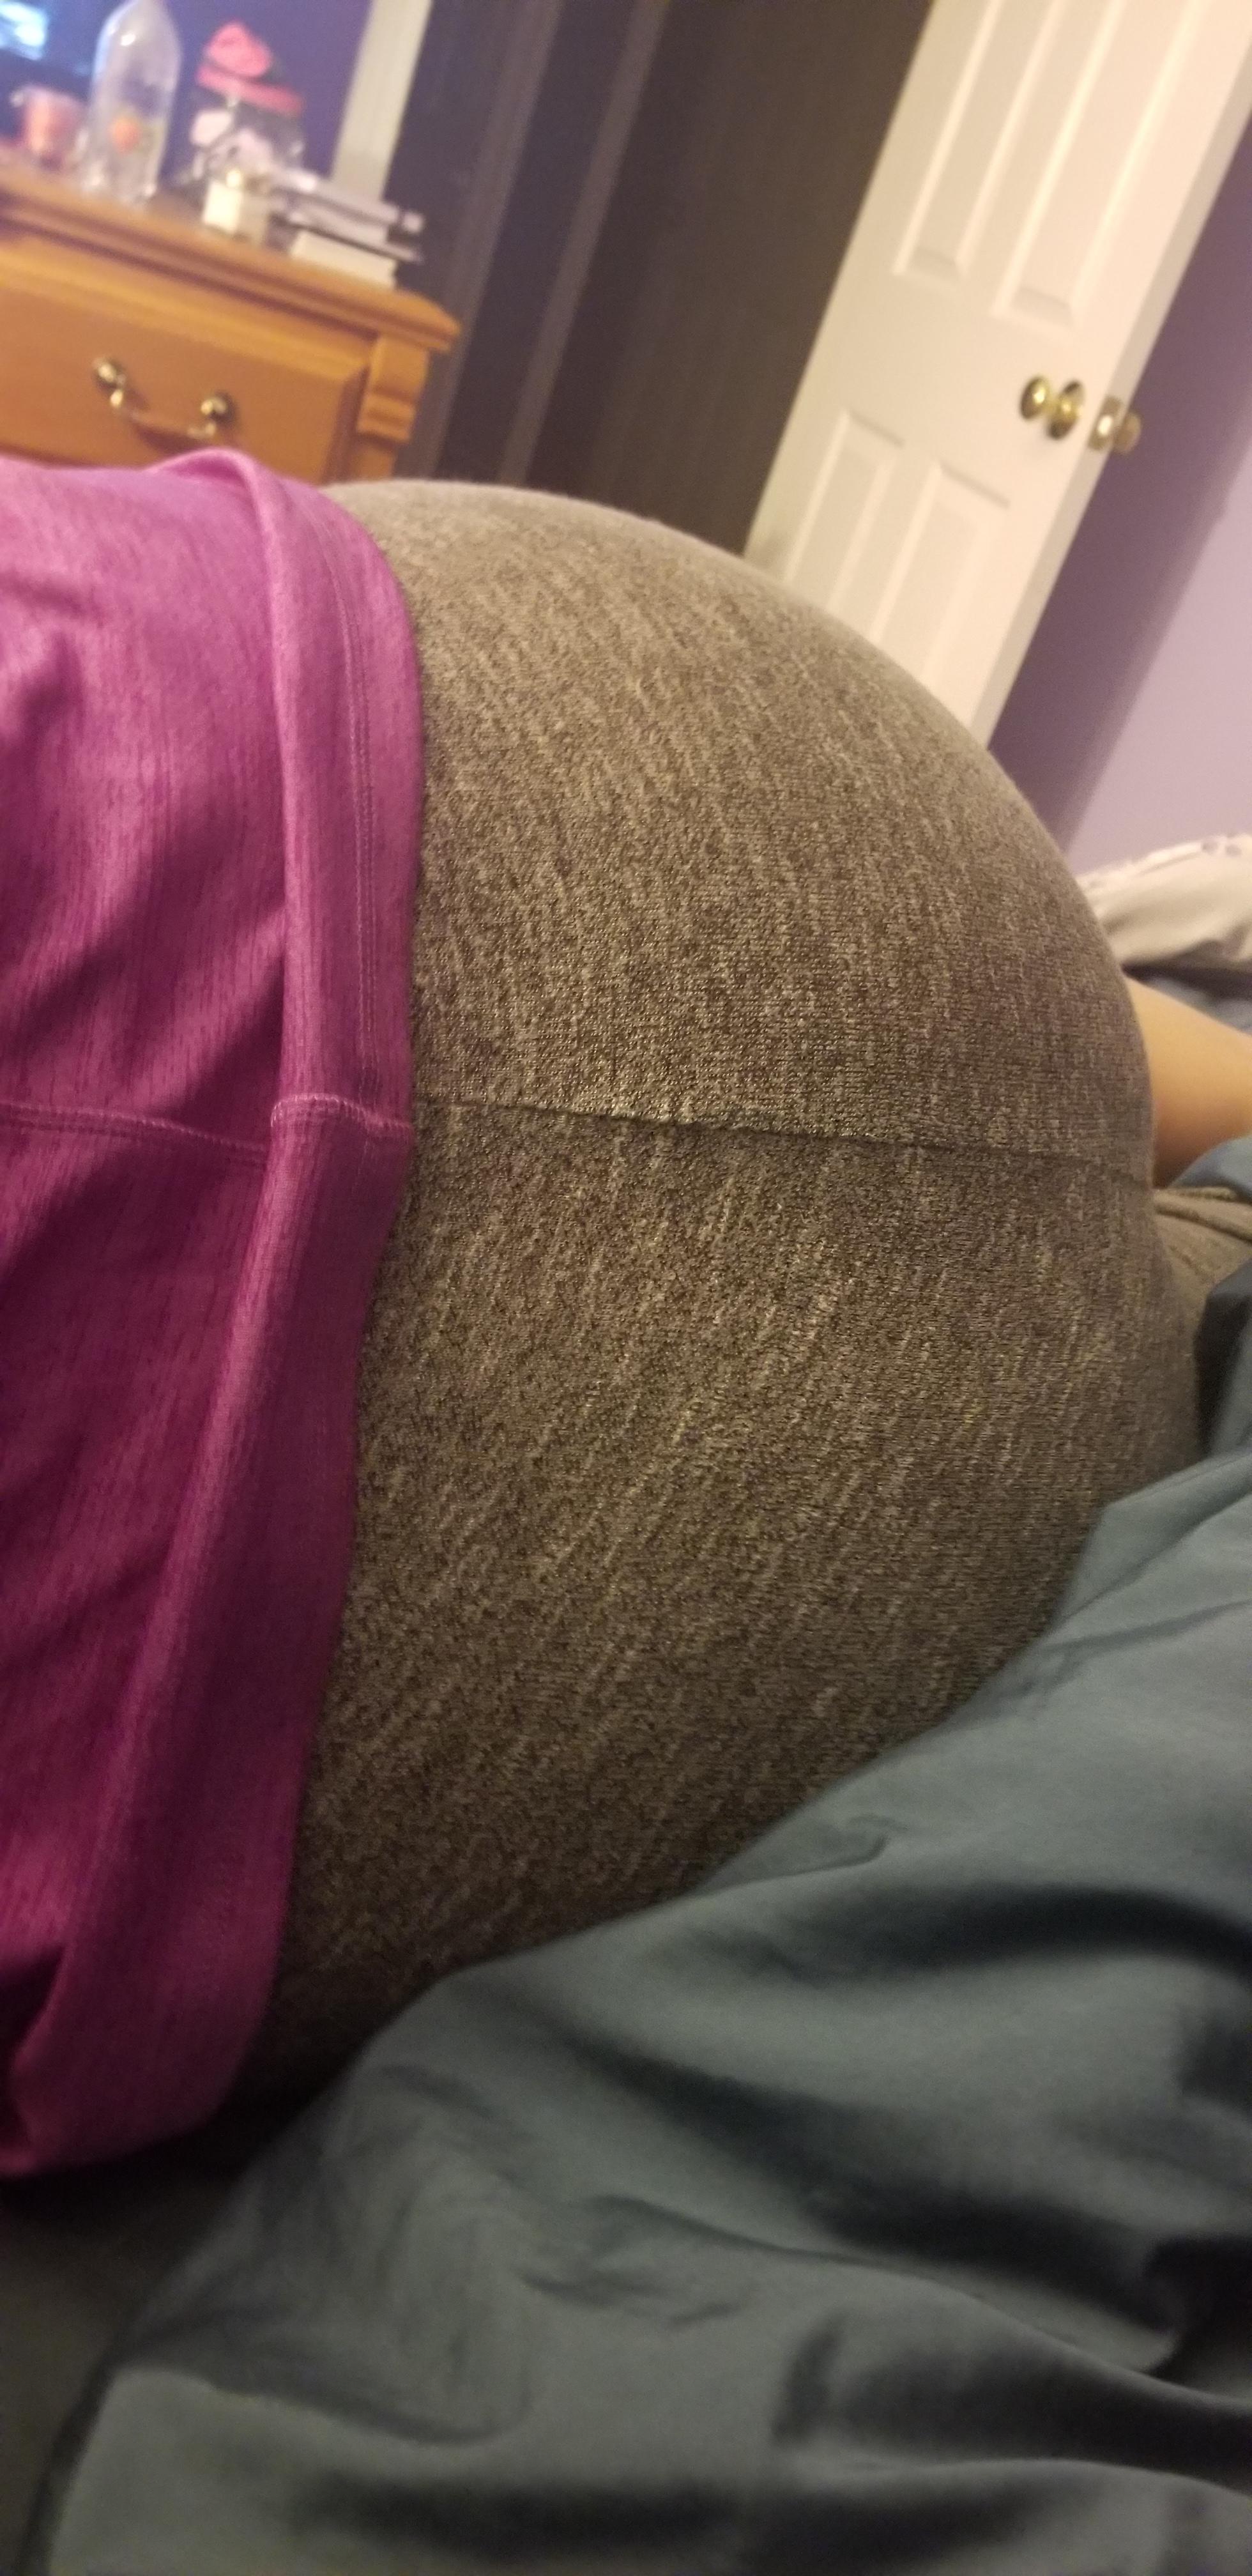 My Mothers Delicious Looking Ass 😋 Scrolller